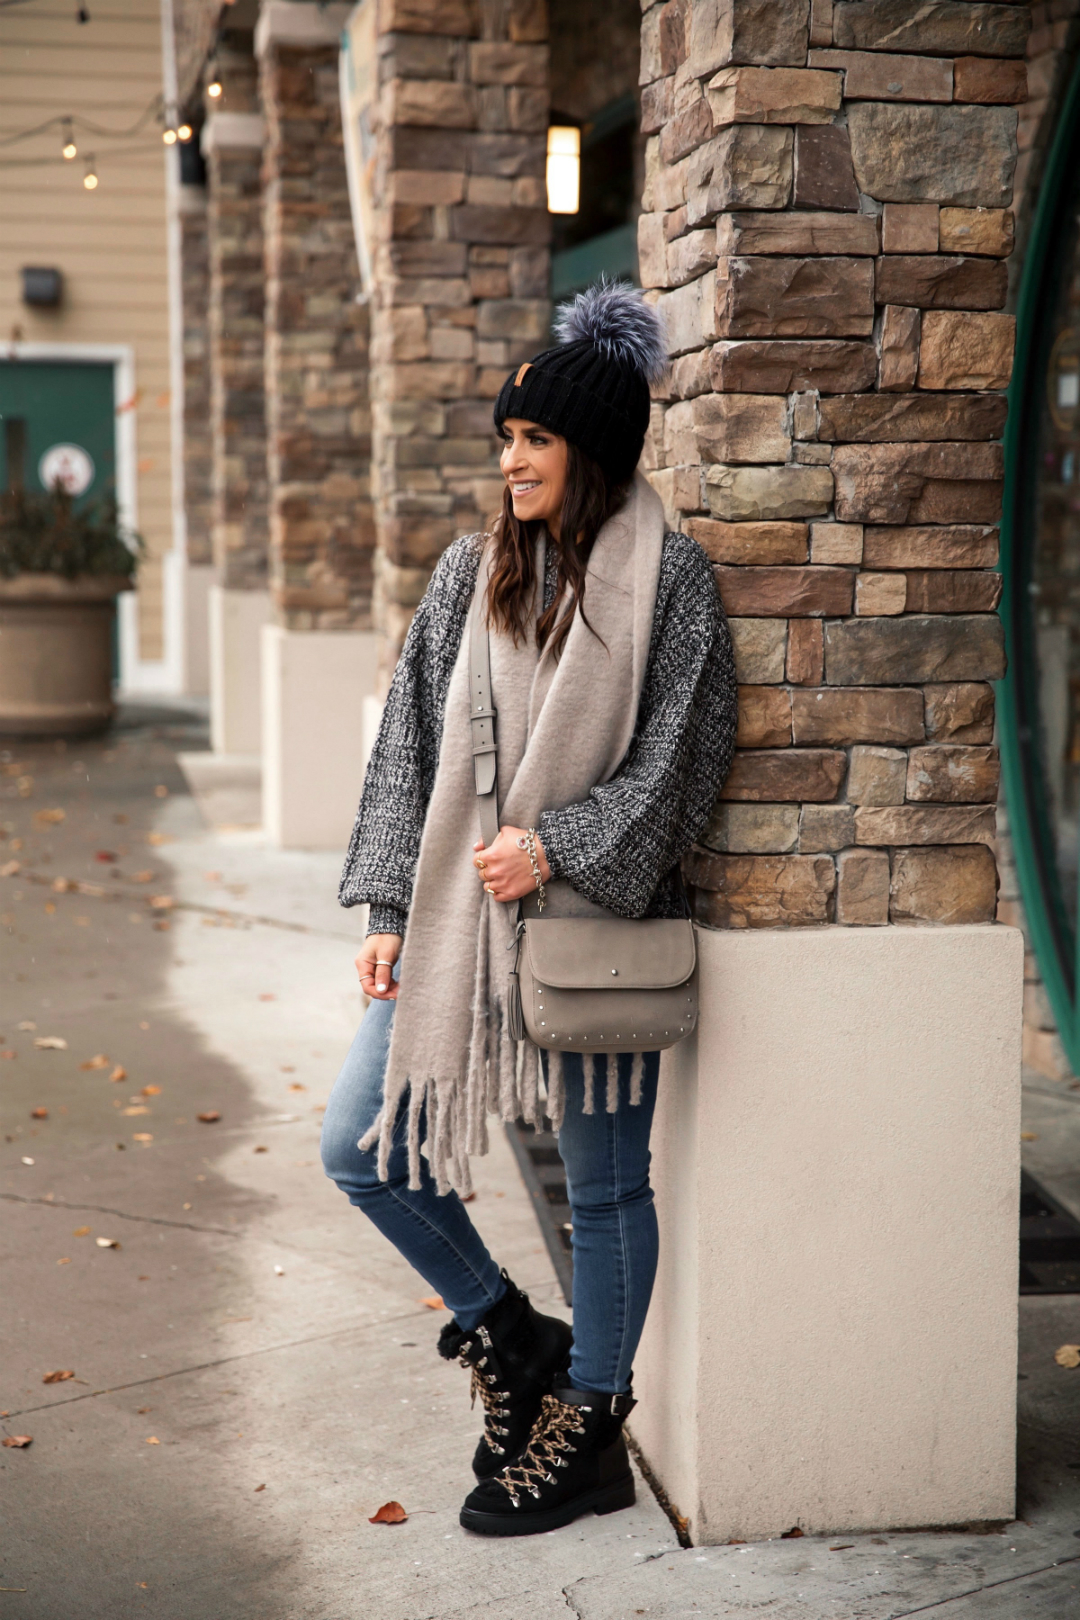 Blogger Sarah Lindner of The House of Sequins styling a fall outfit with chunky knits from Walmart